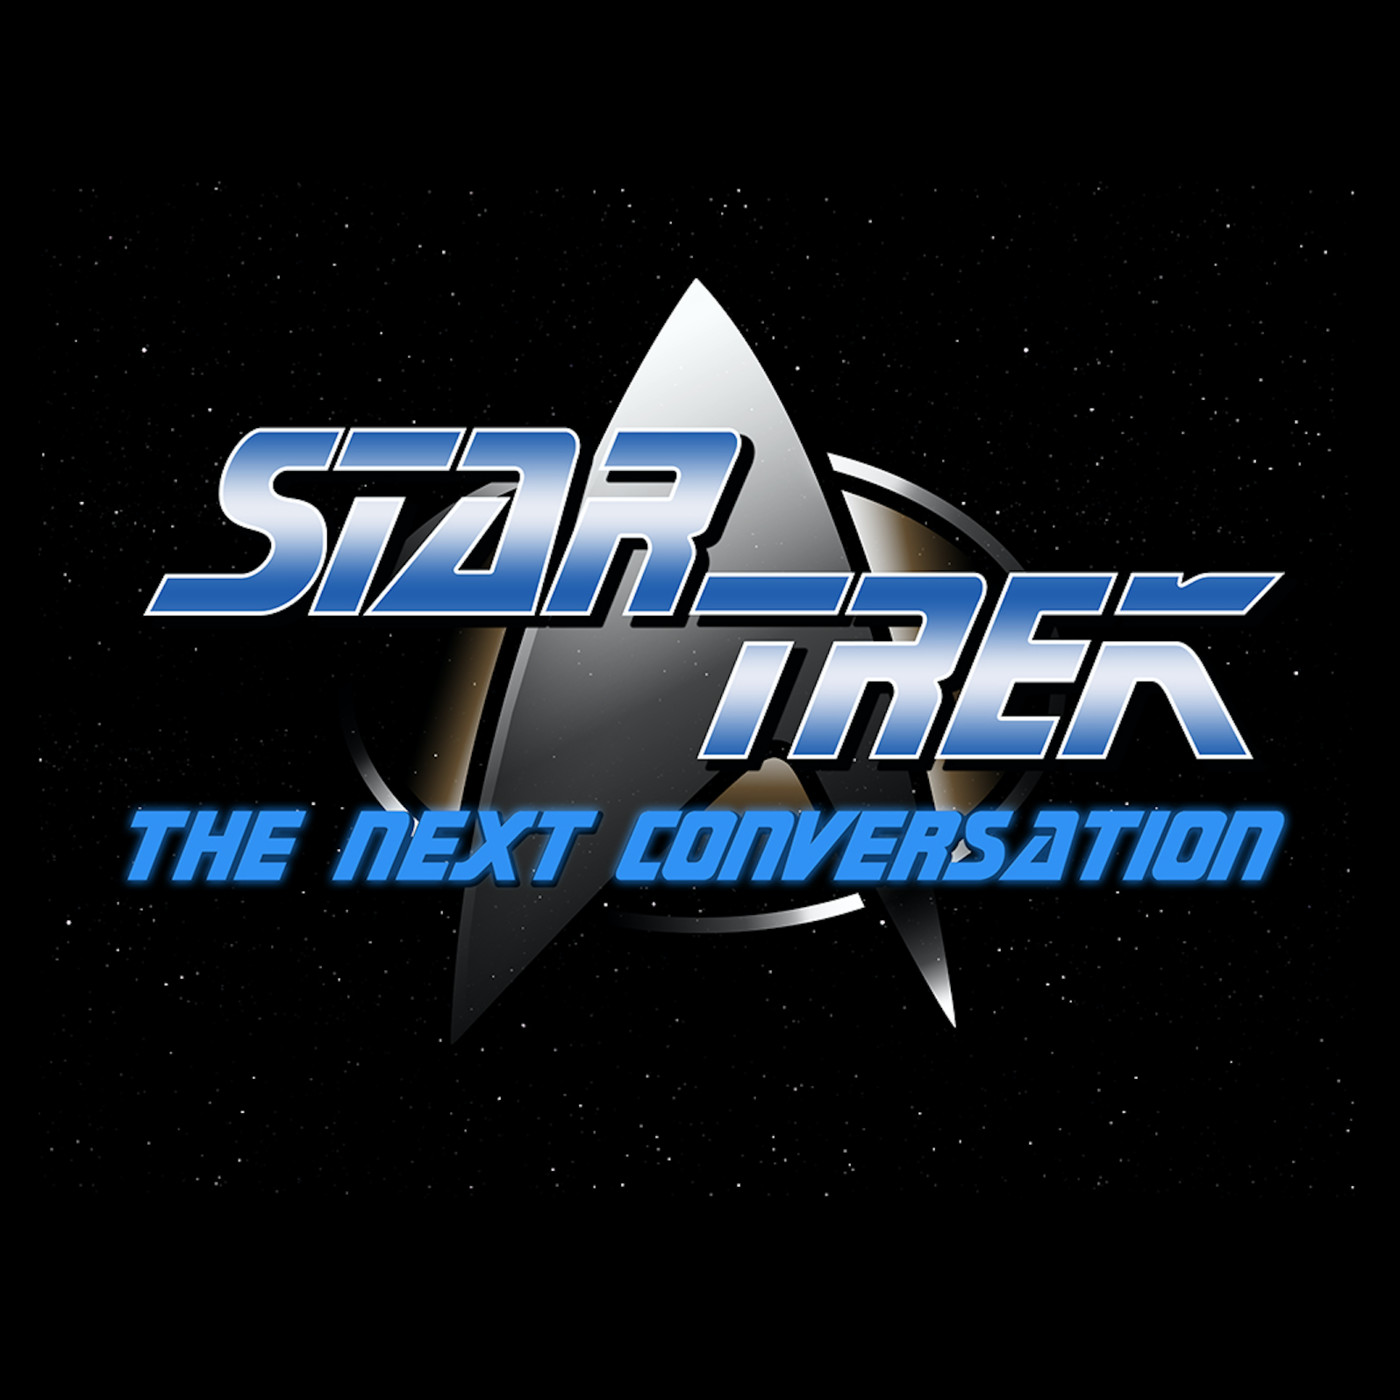 Star Trek The Next Conversation - a semi funny trashfire of a Star Trek podcast currently about TV's